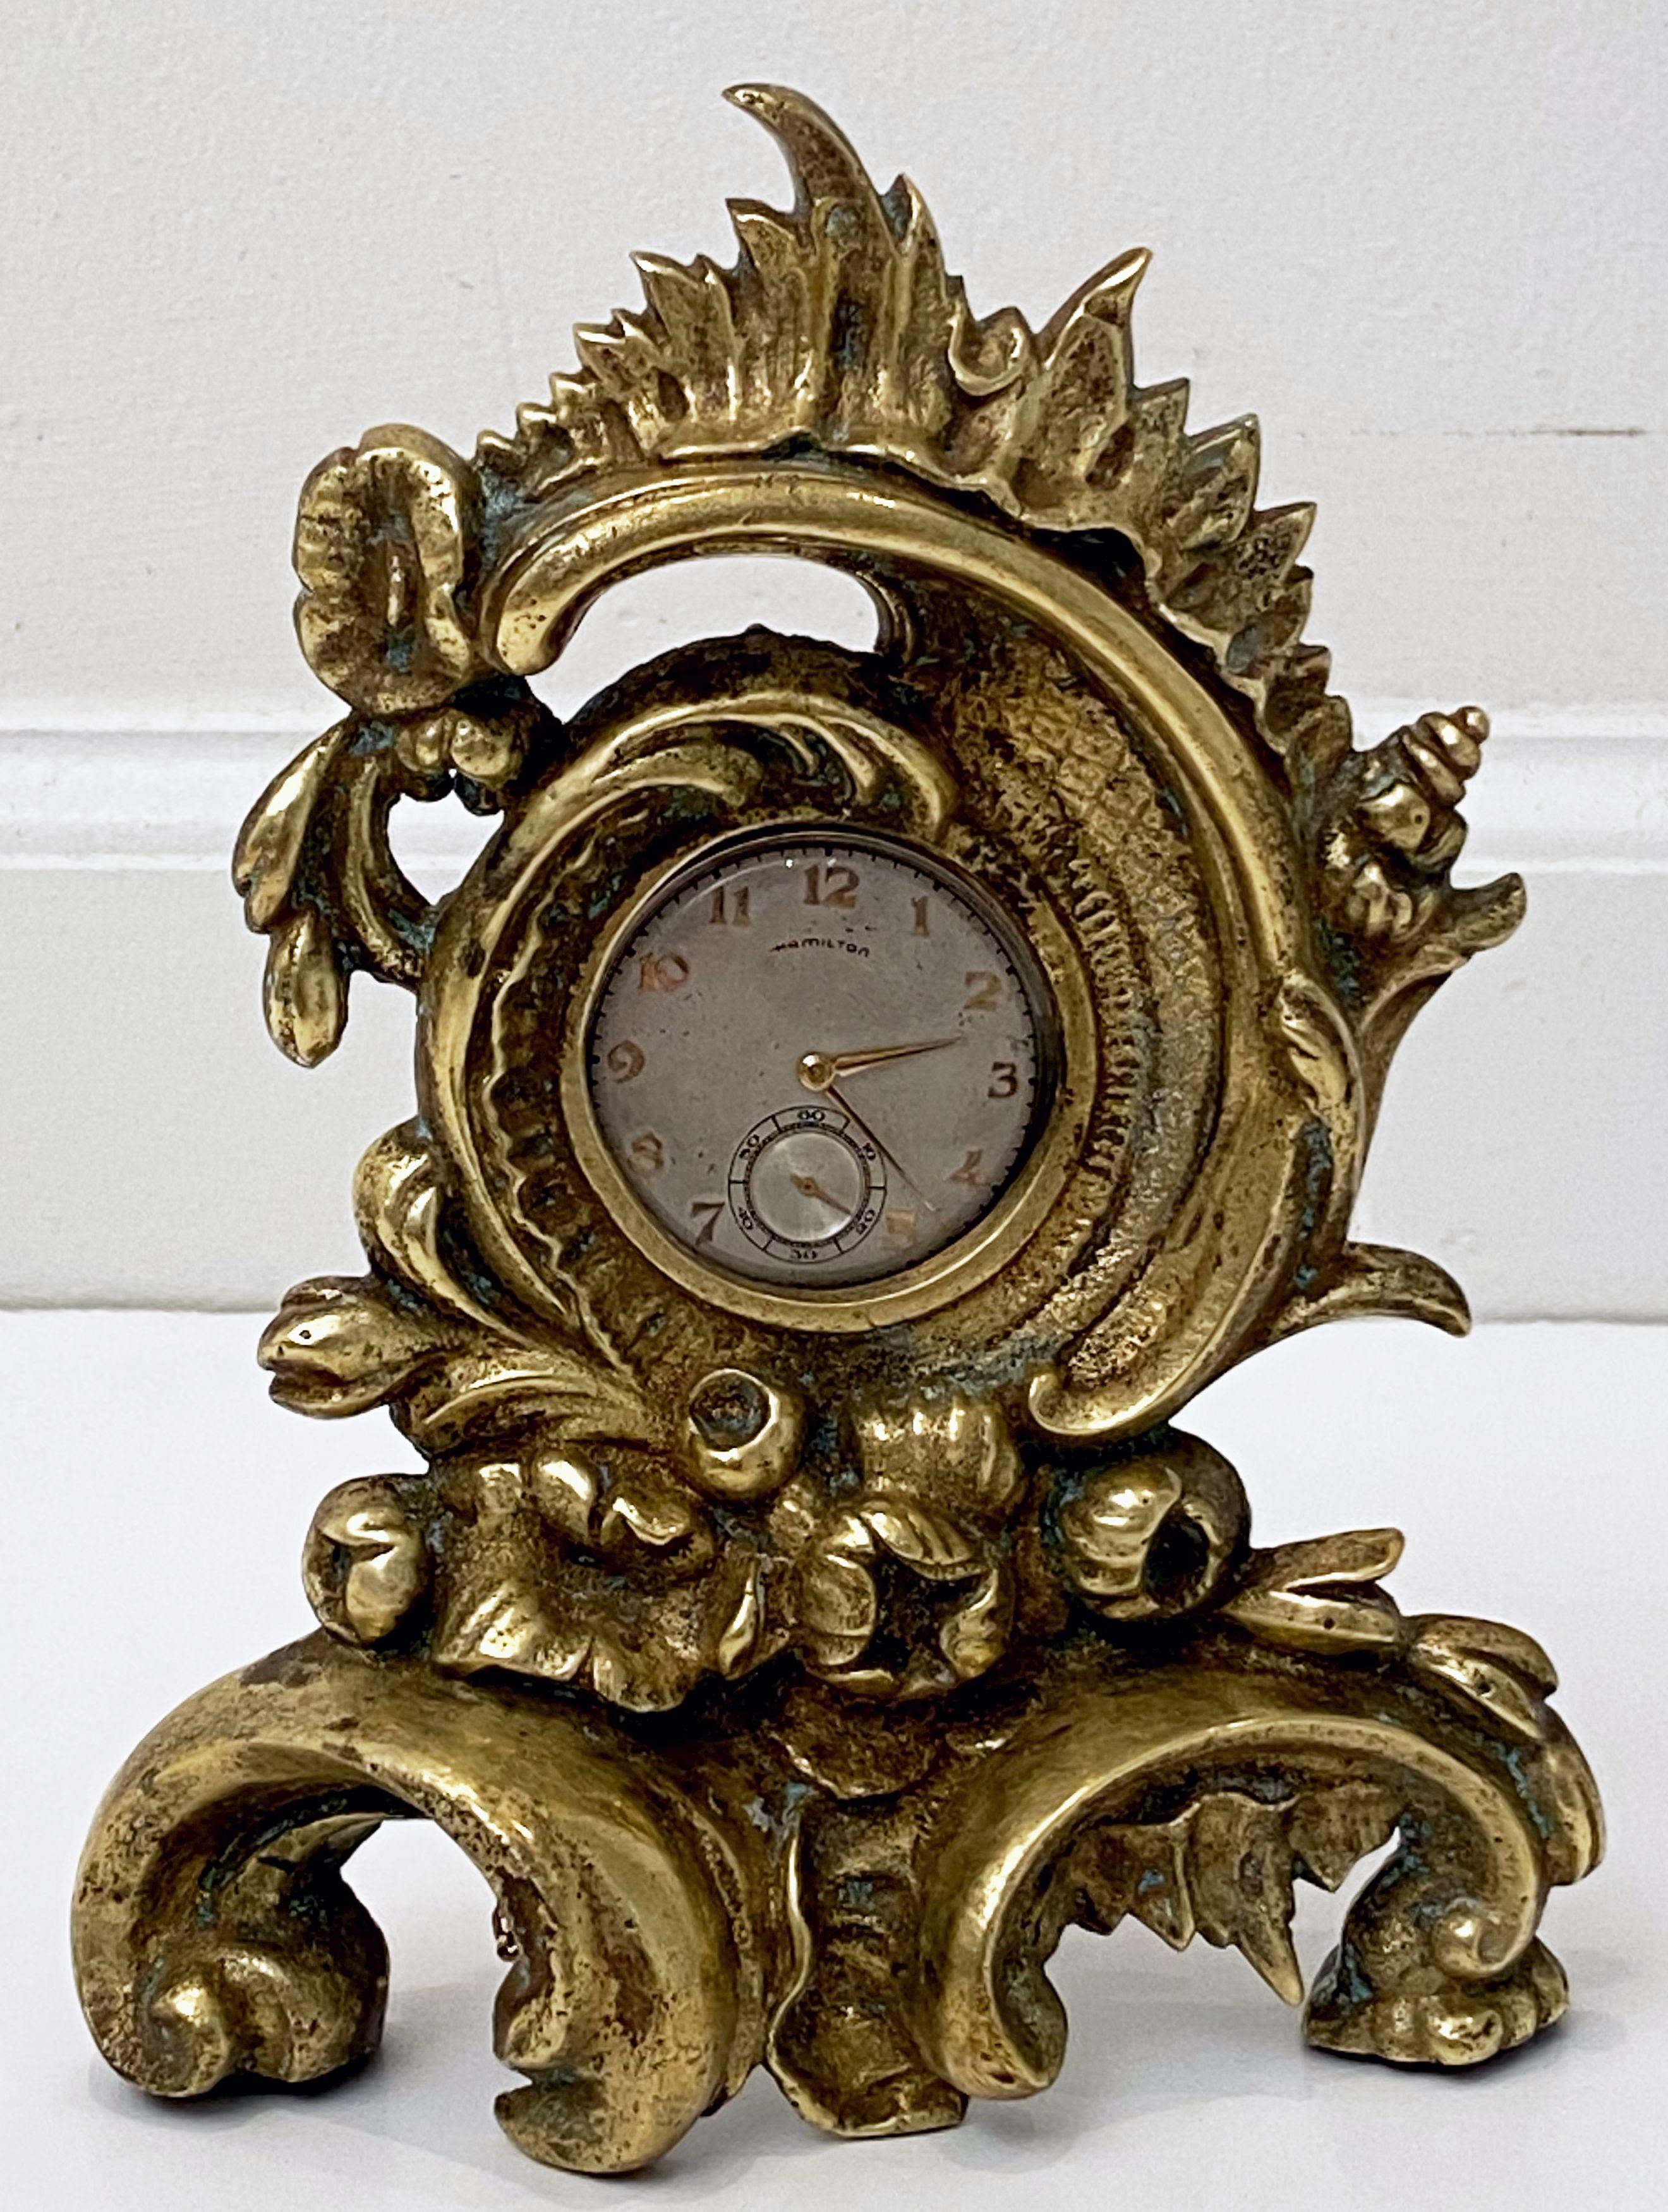 A fine French pocket watch holder or display stand of gilt bronze from the late 19th c. featuring a stylish rococo or baroque design.

Note: does not include pocket watch in photo.